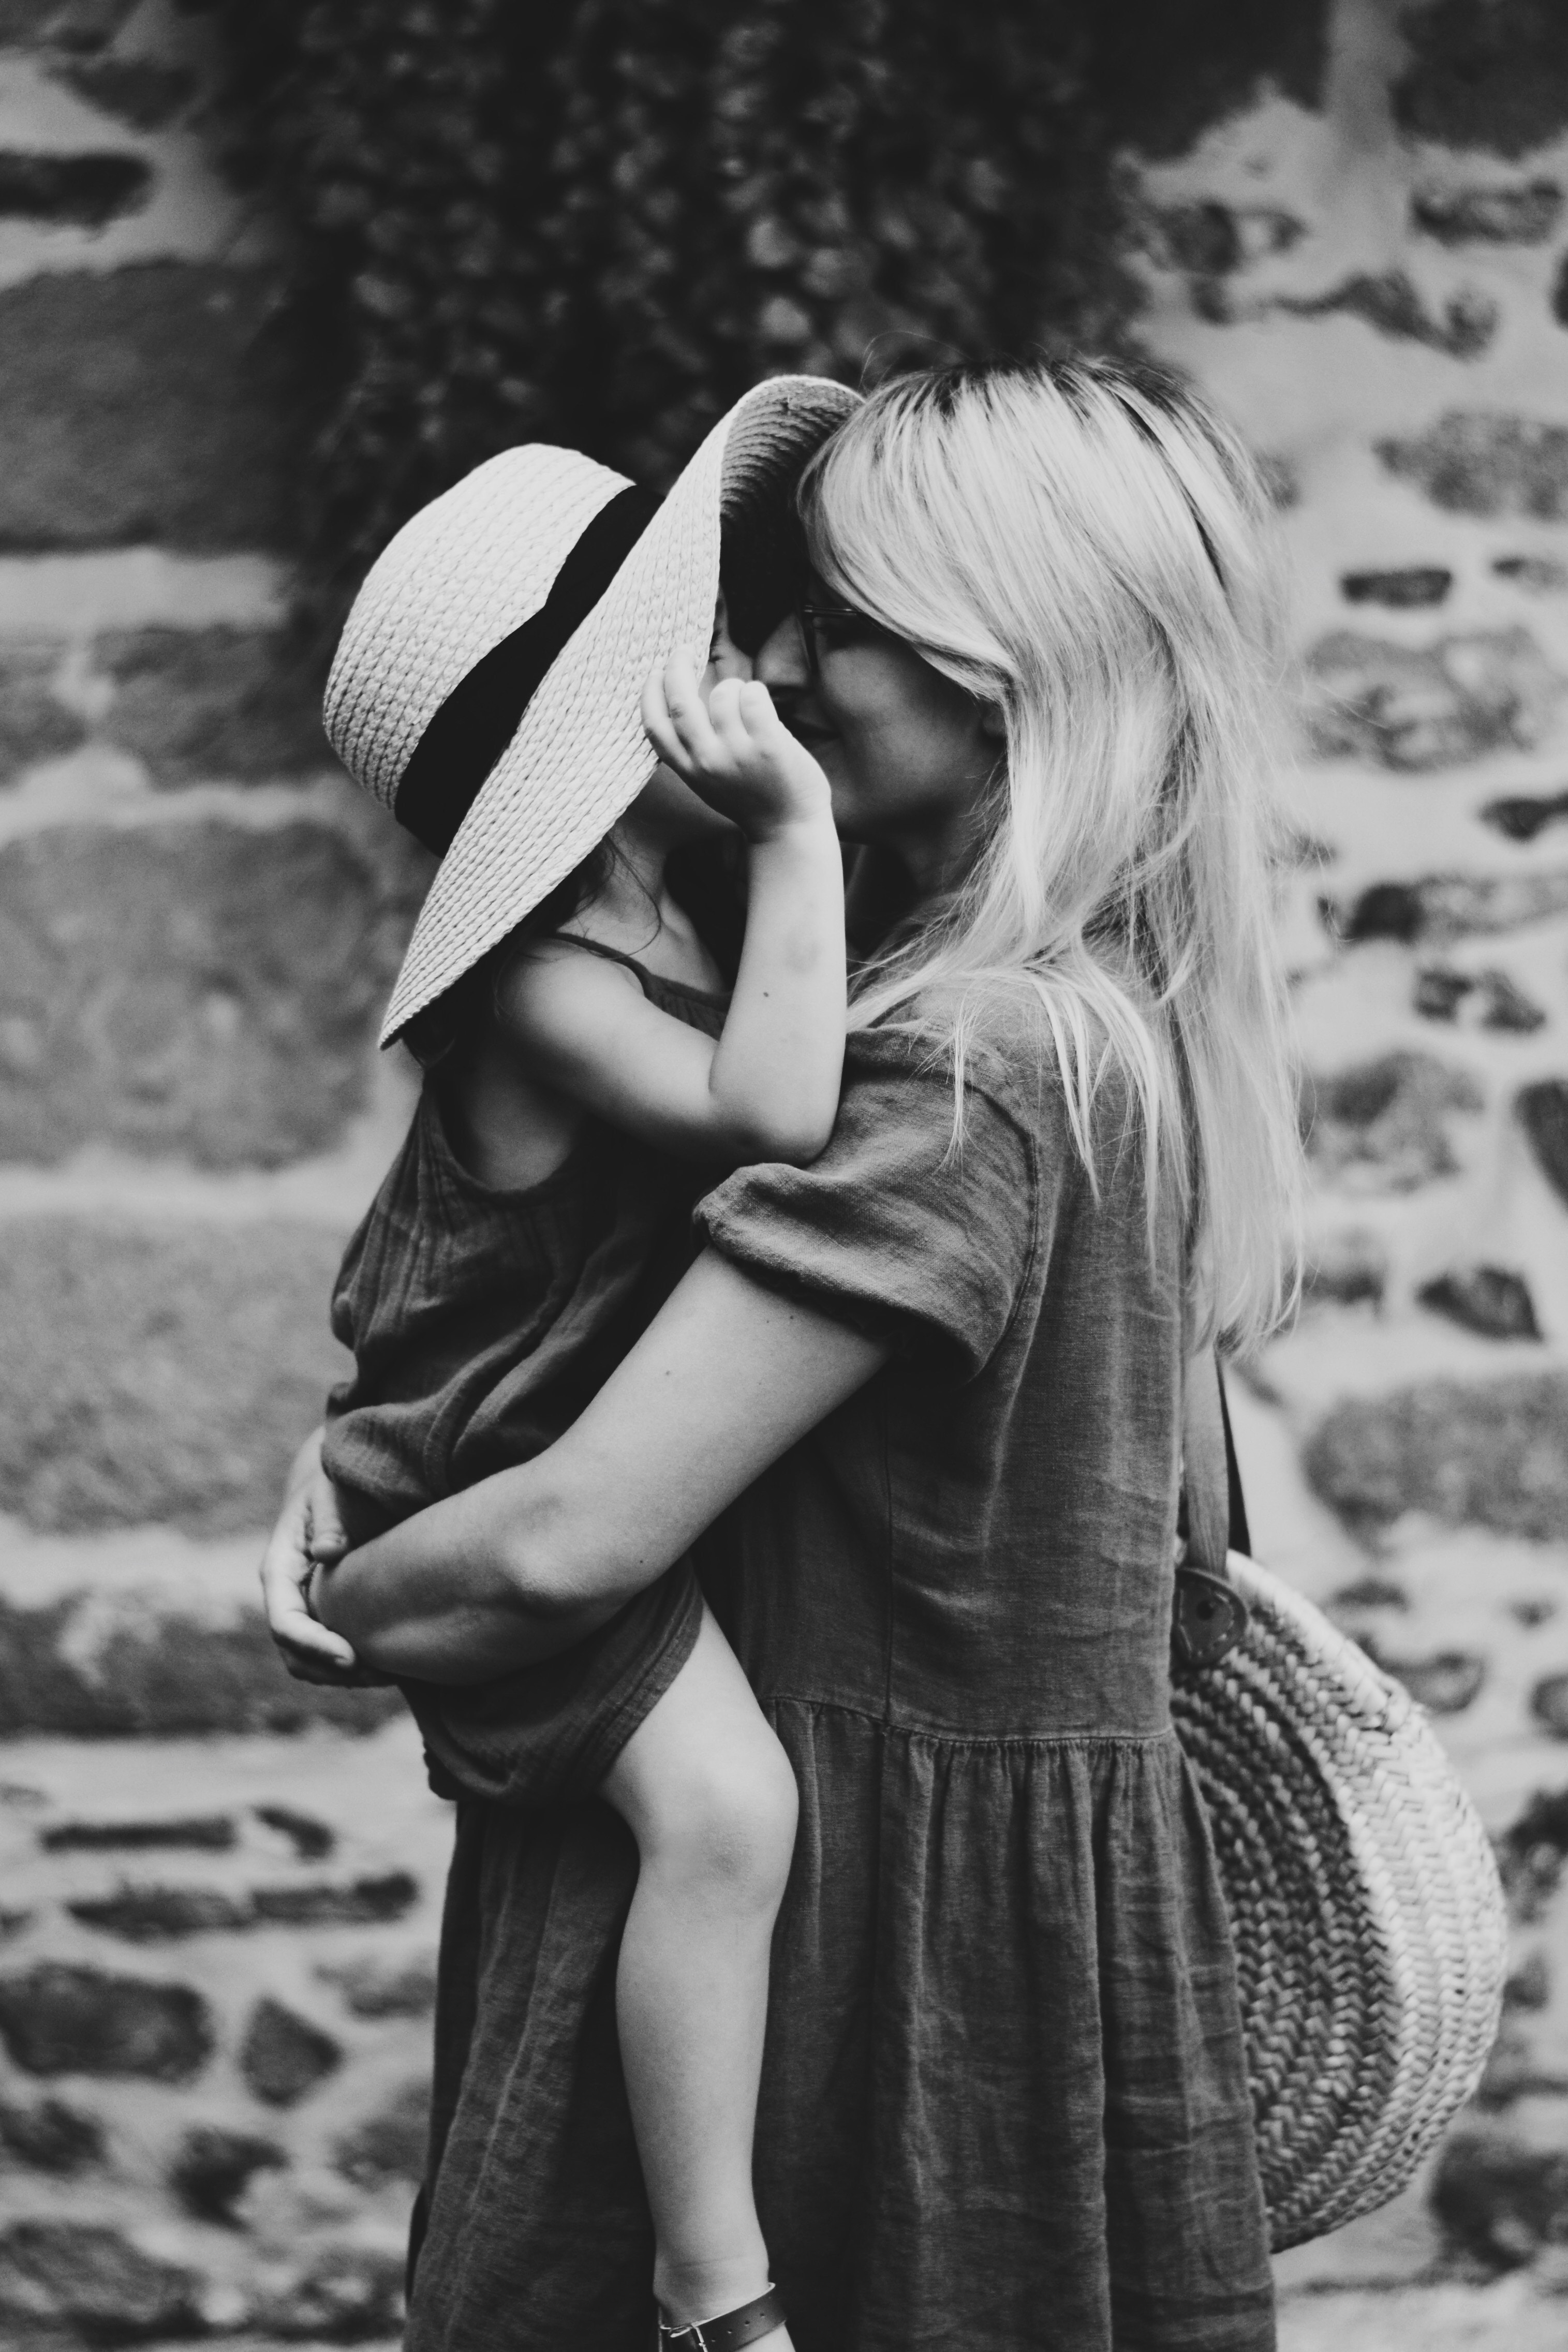 mother, family, embrace, miscellanea, miscellaneous, bw, chb, tenderness, child, hat, hug